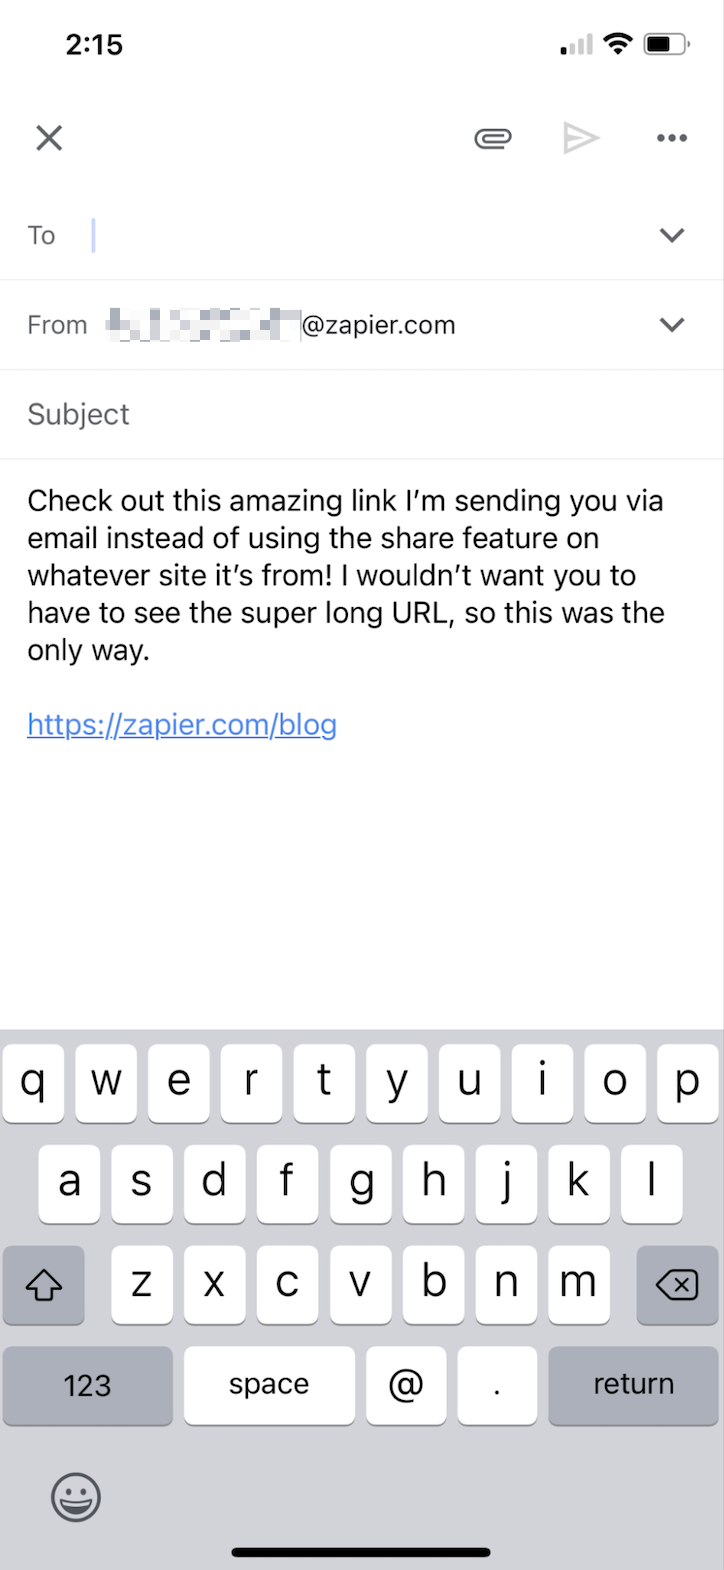 Hyperlinked URL at the bottom of the email